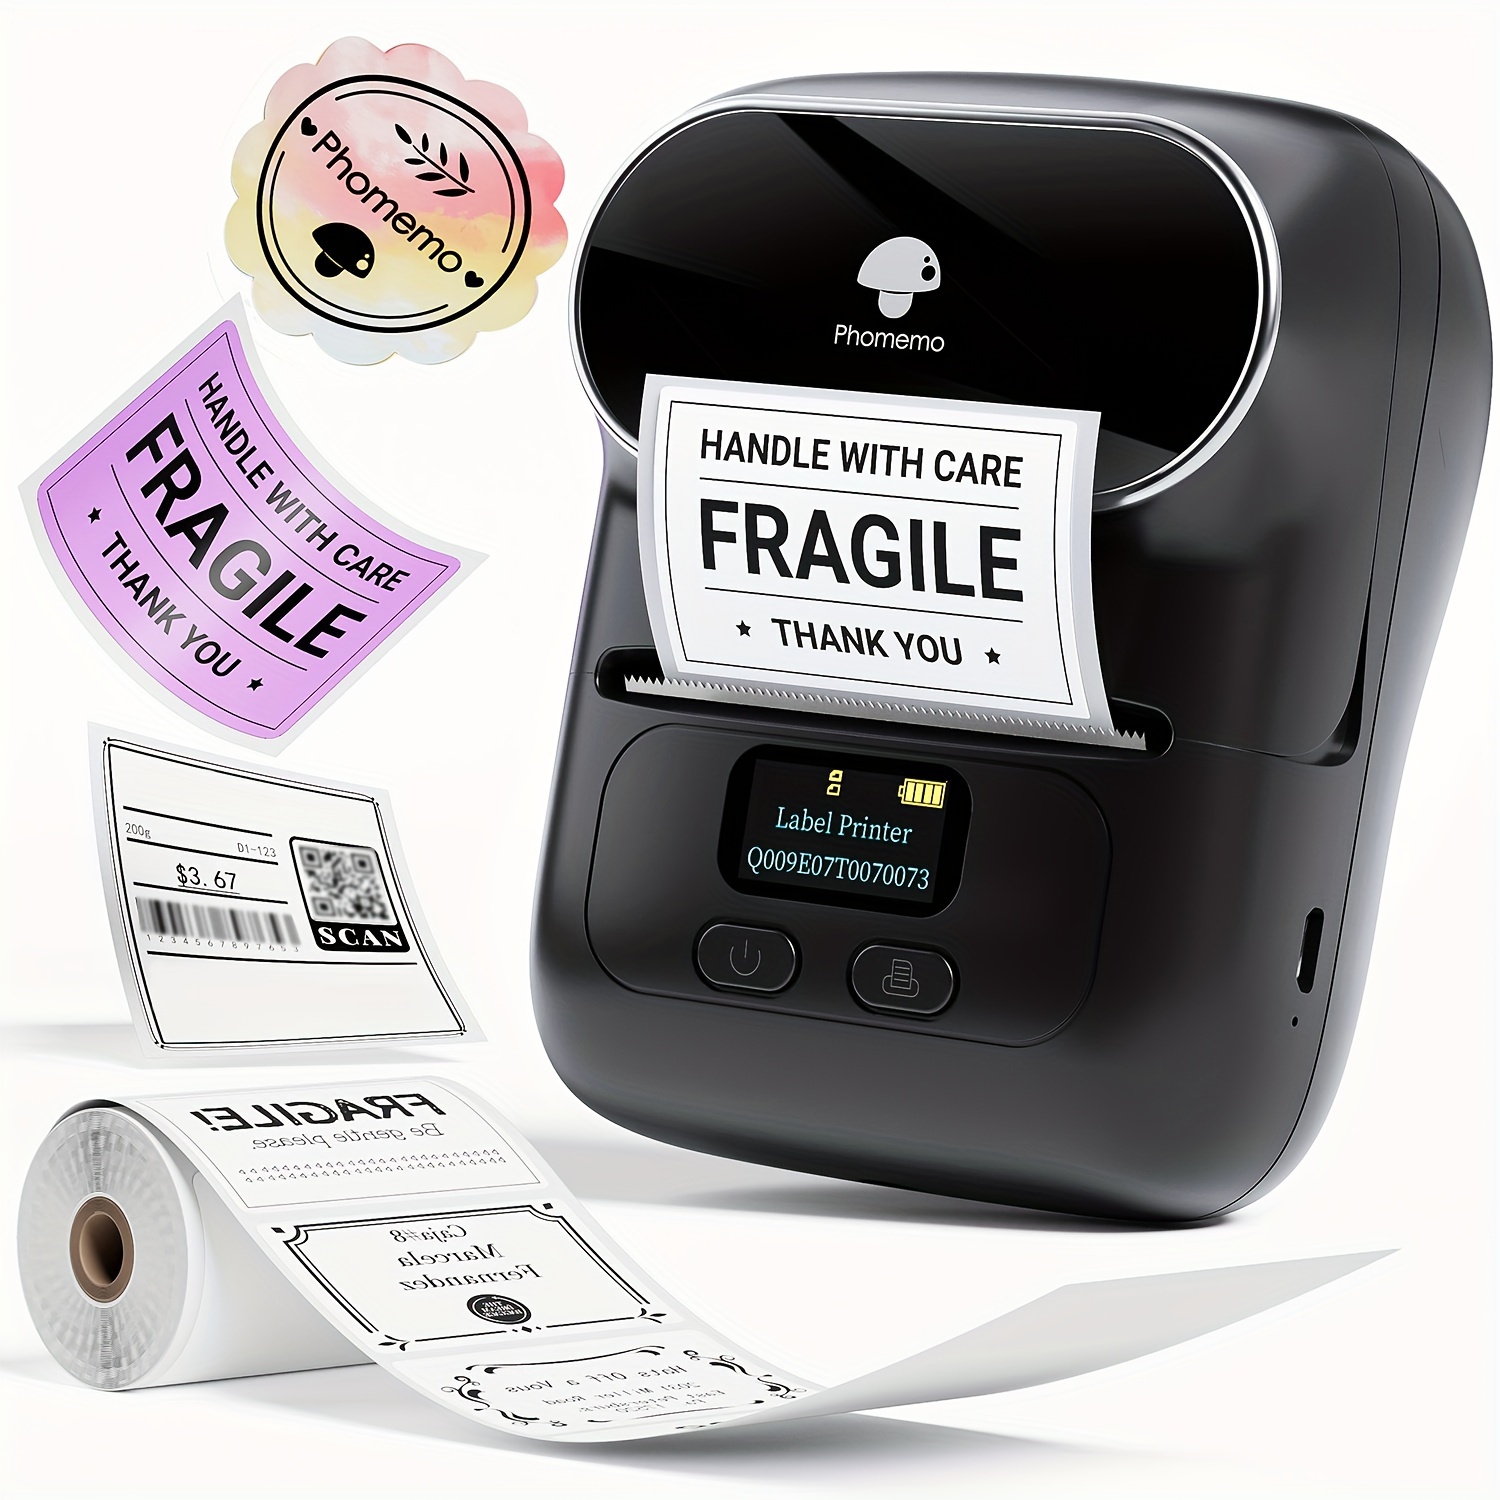 Phomemo M110 Label Printer - Wireless Portable Thermal Printer For Small  Businesses, Addresses, Logos, Clothing, And Mail Barcode Label Printing  Sticker Printer For Phones And Computer Black Color